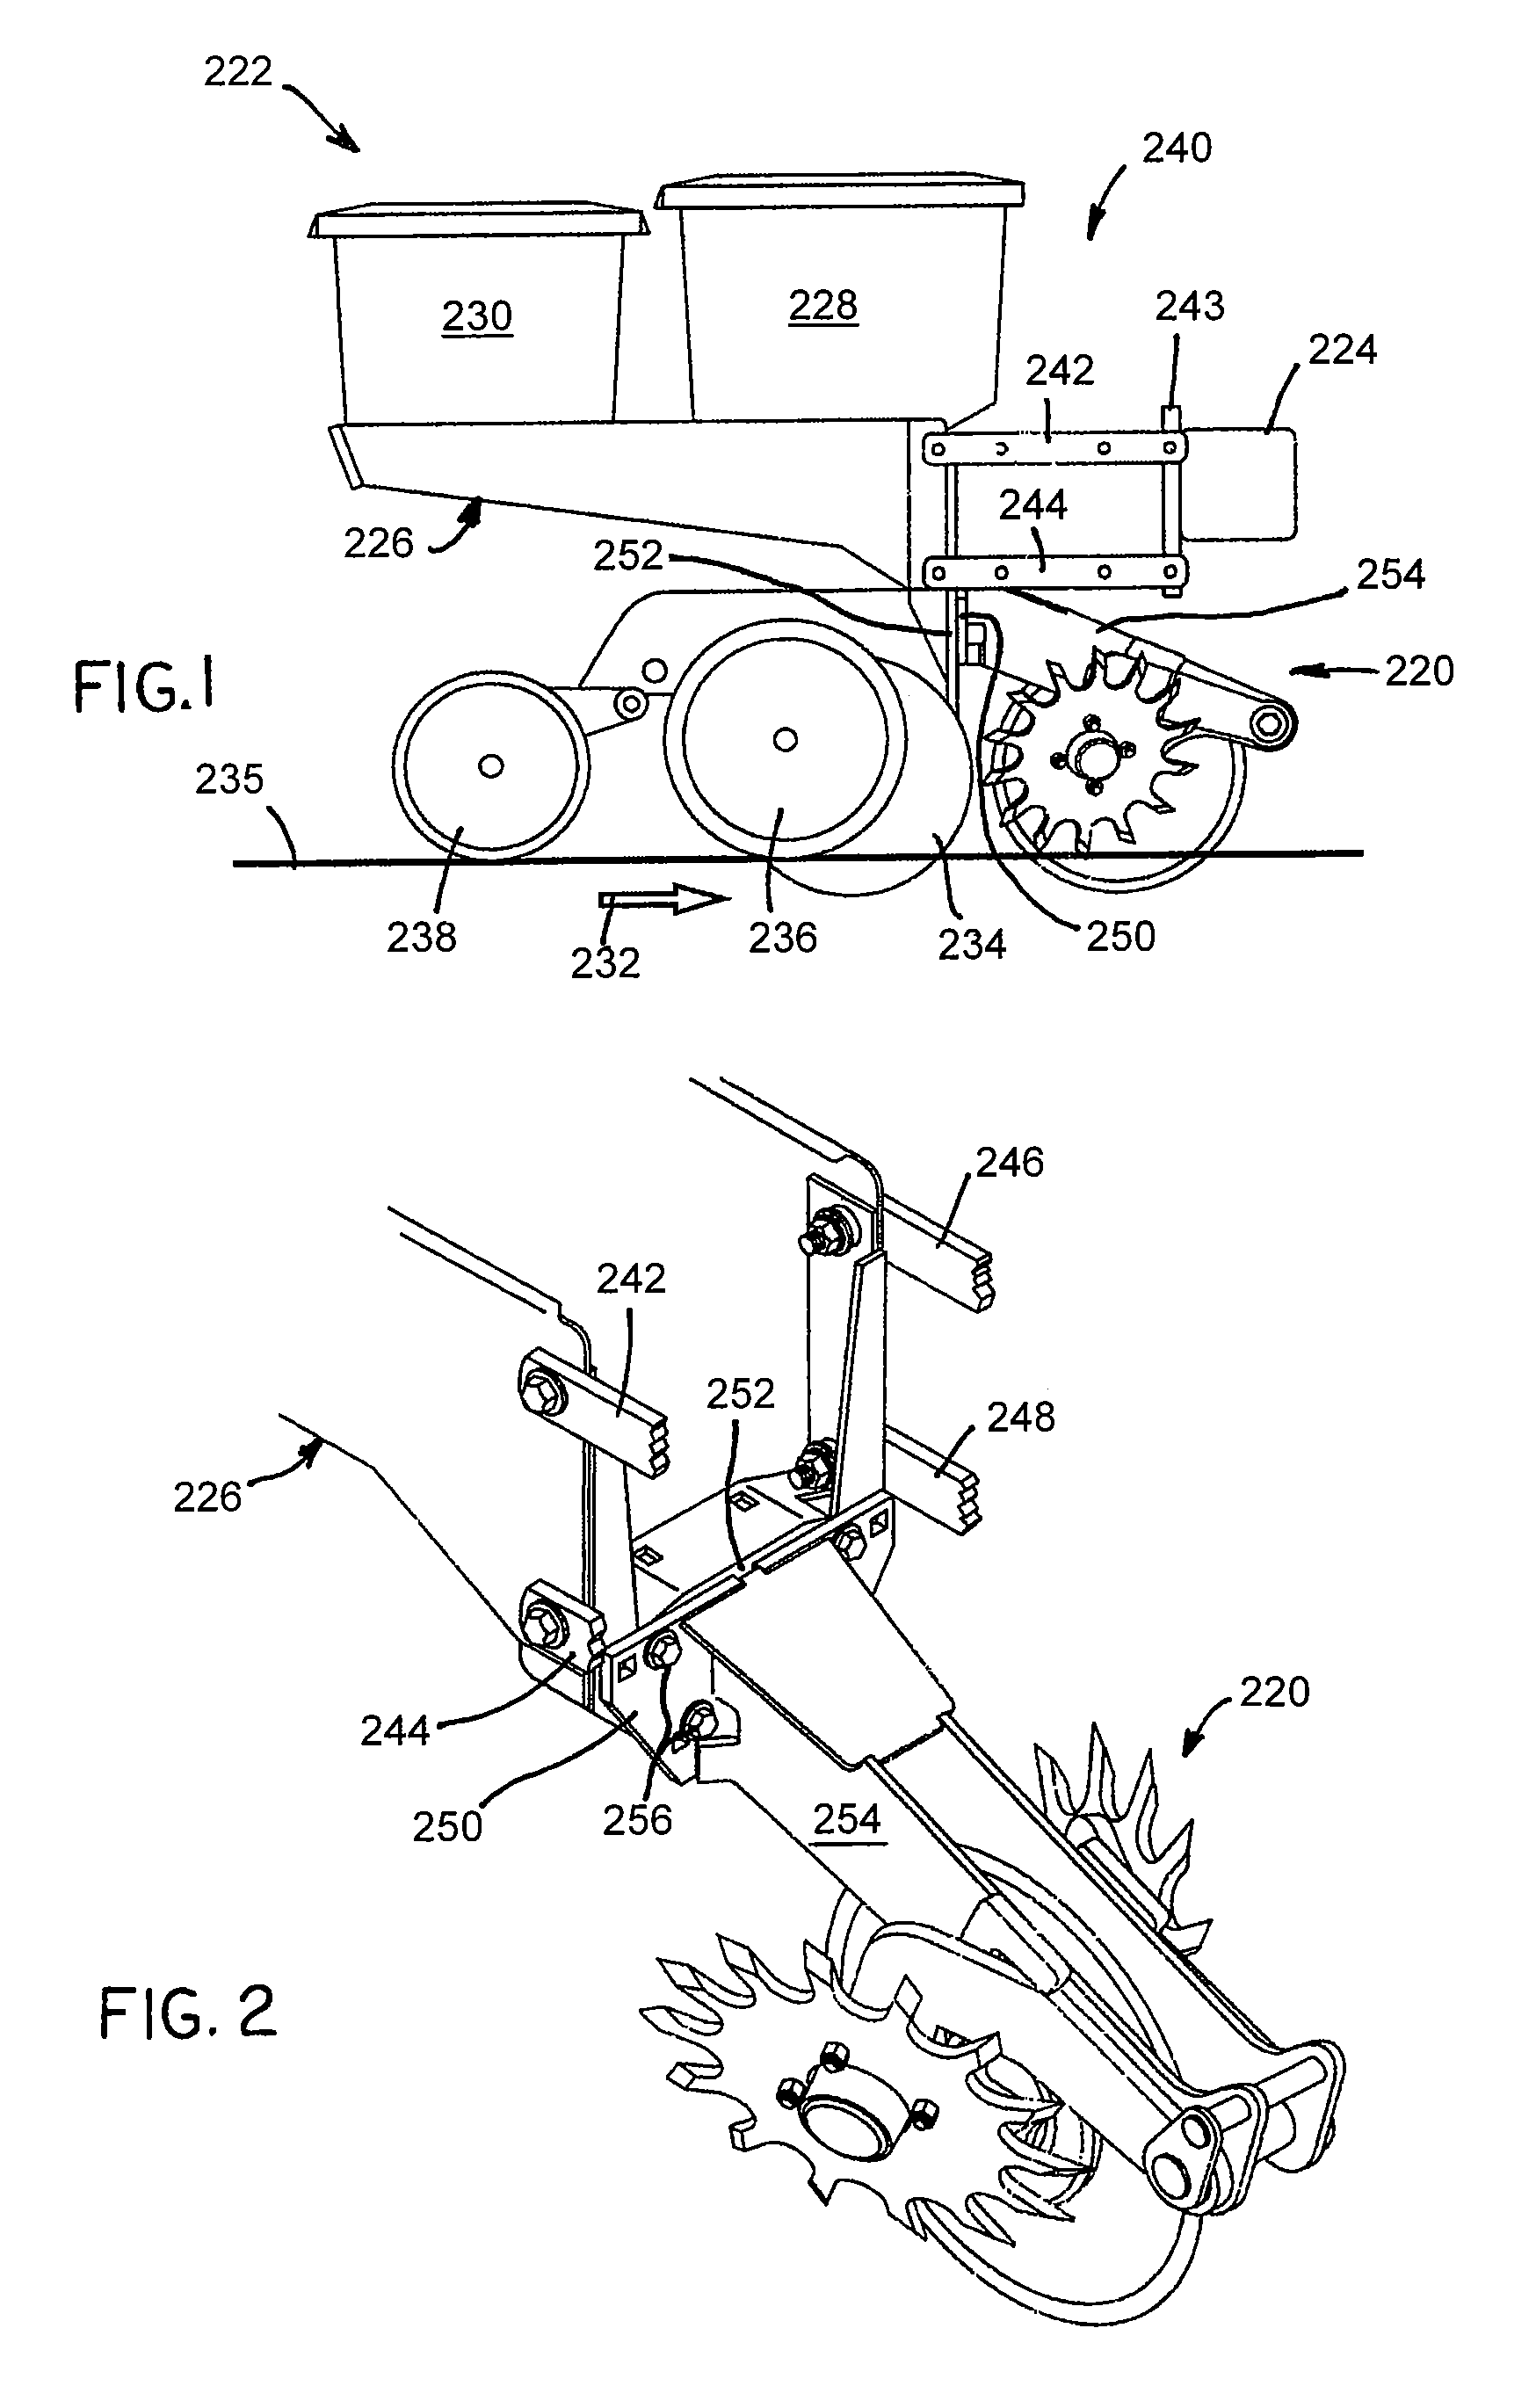 Crop residue clearing device